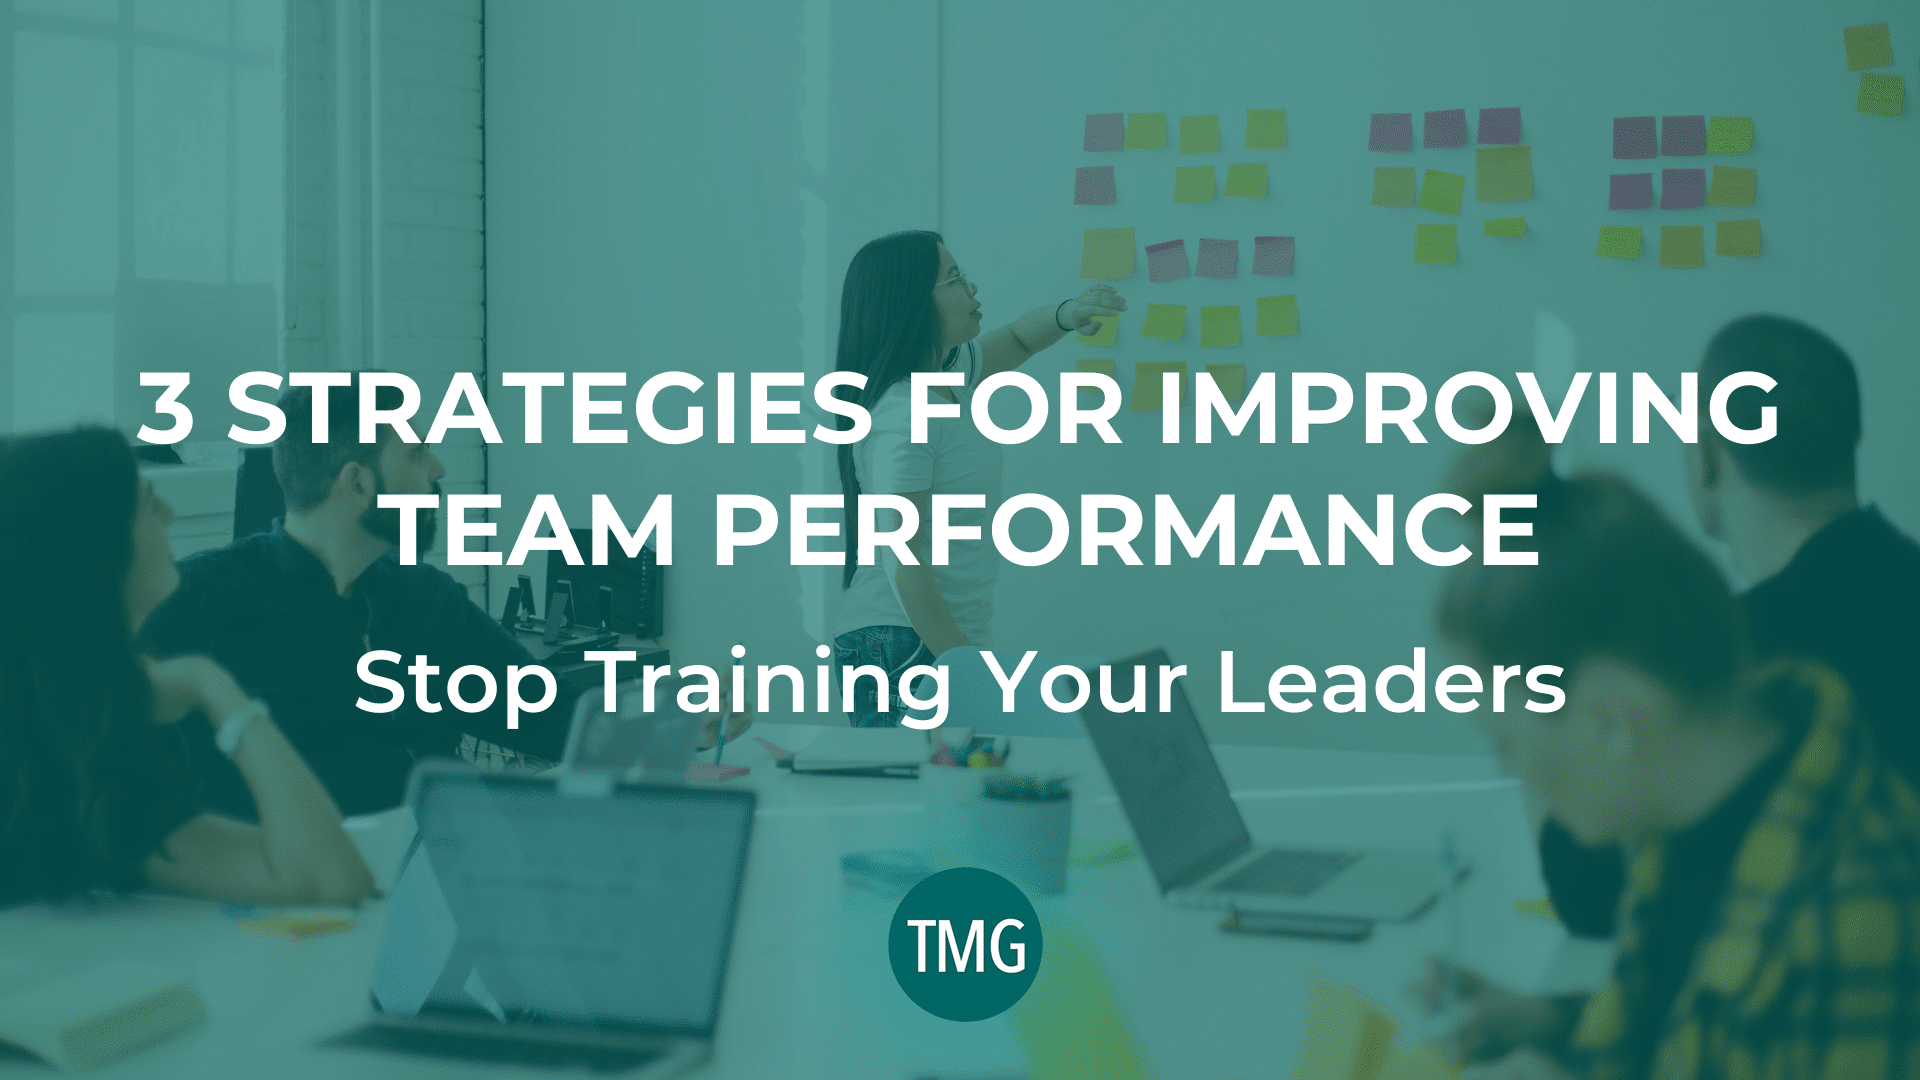 stop-training-your-leaders-header-image